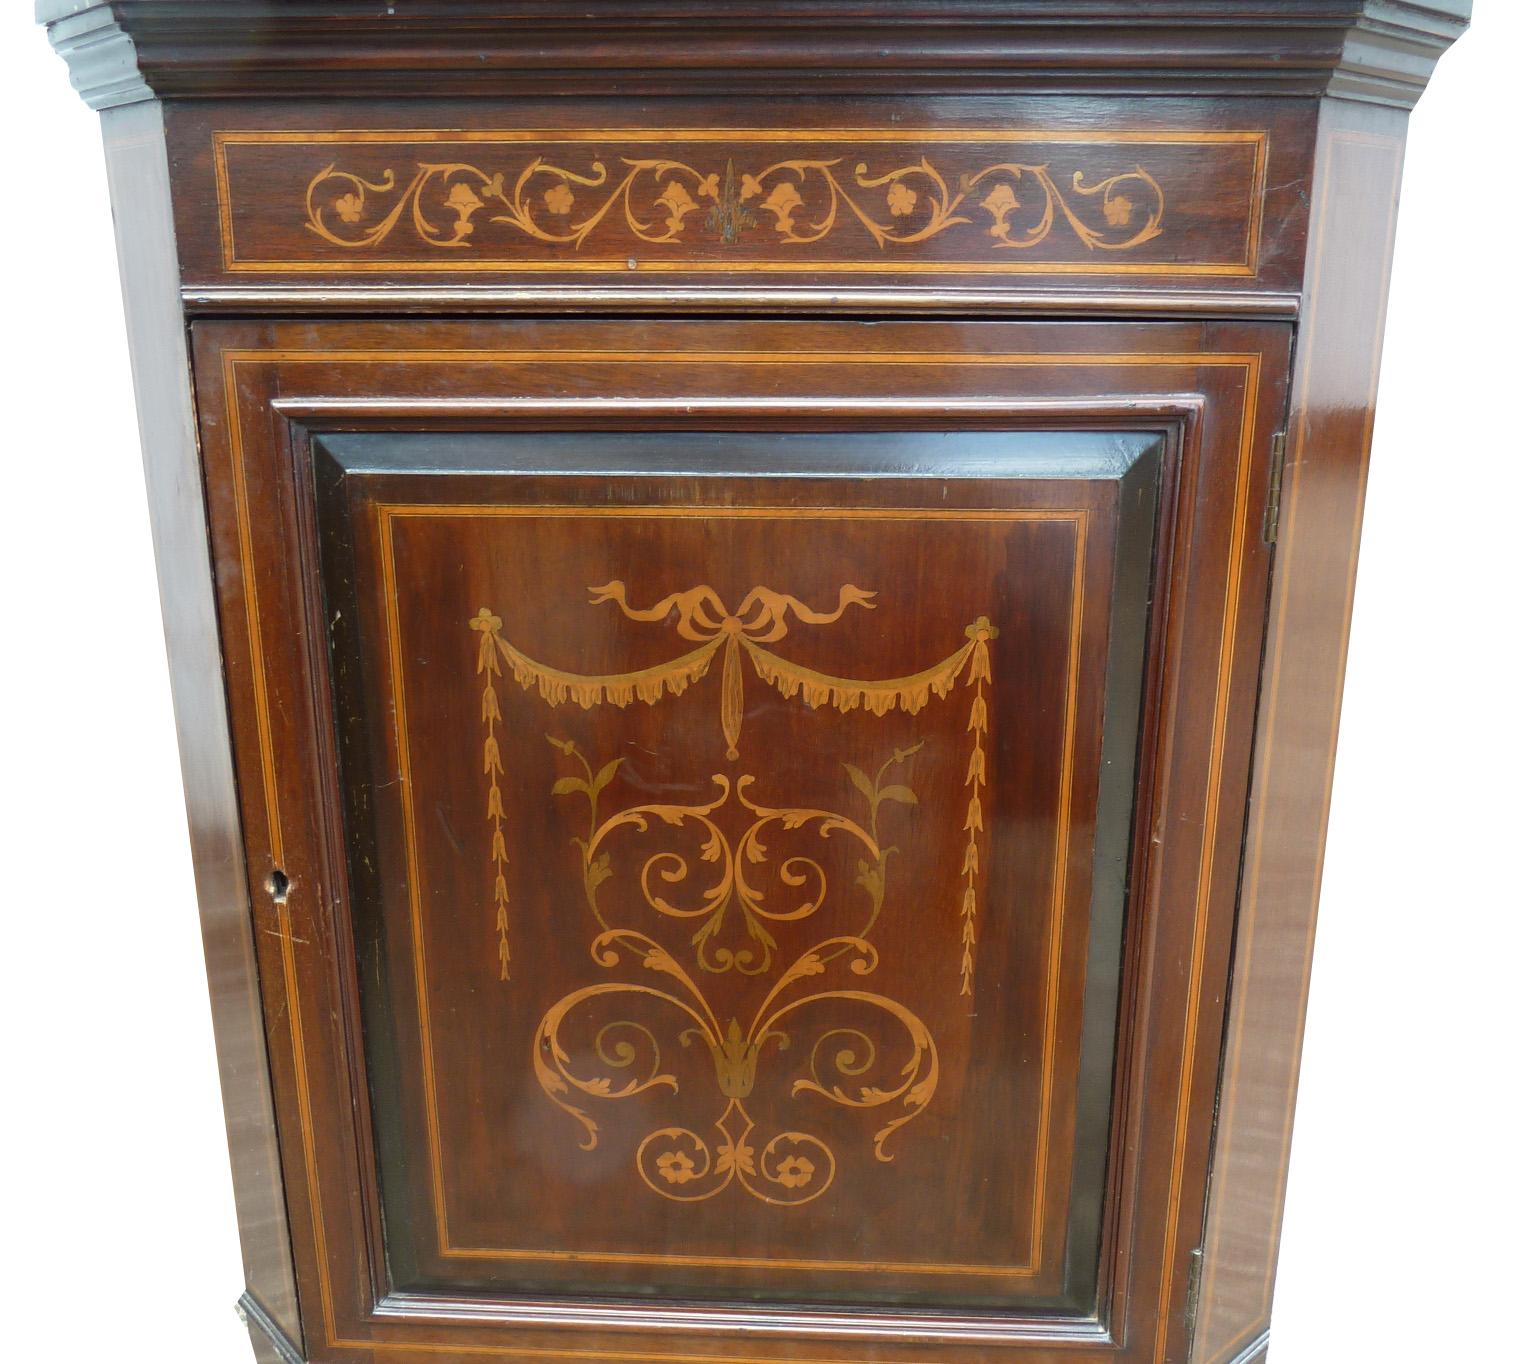 For sale is an Edwardian marquetry inlaid corner display cabinet. The top of the cabinet has an inlaid broken arch pediment above a single glazed door. Below this is a marquetry inlaid door. This piece is in good condition, with average wear